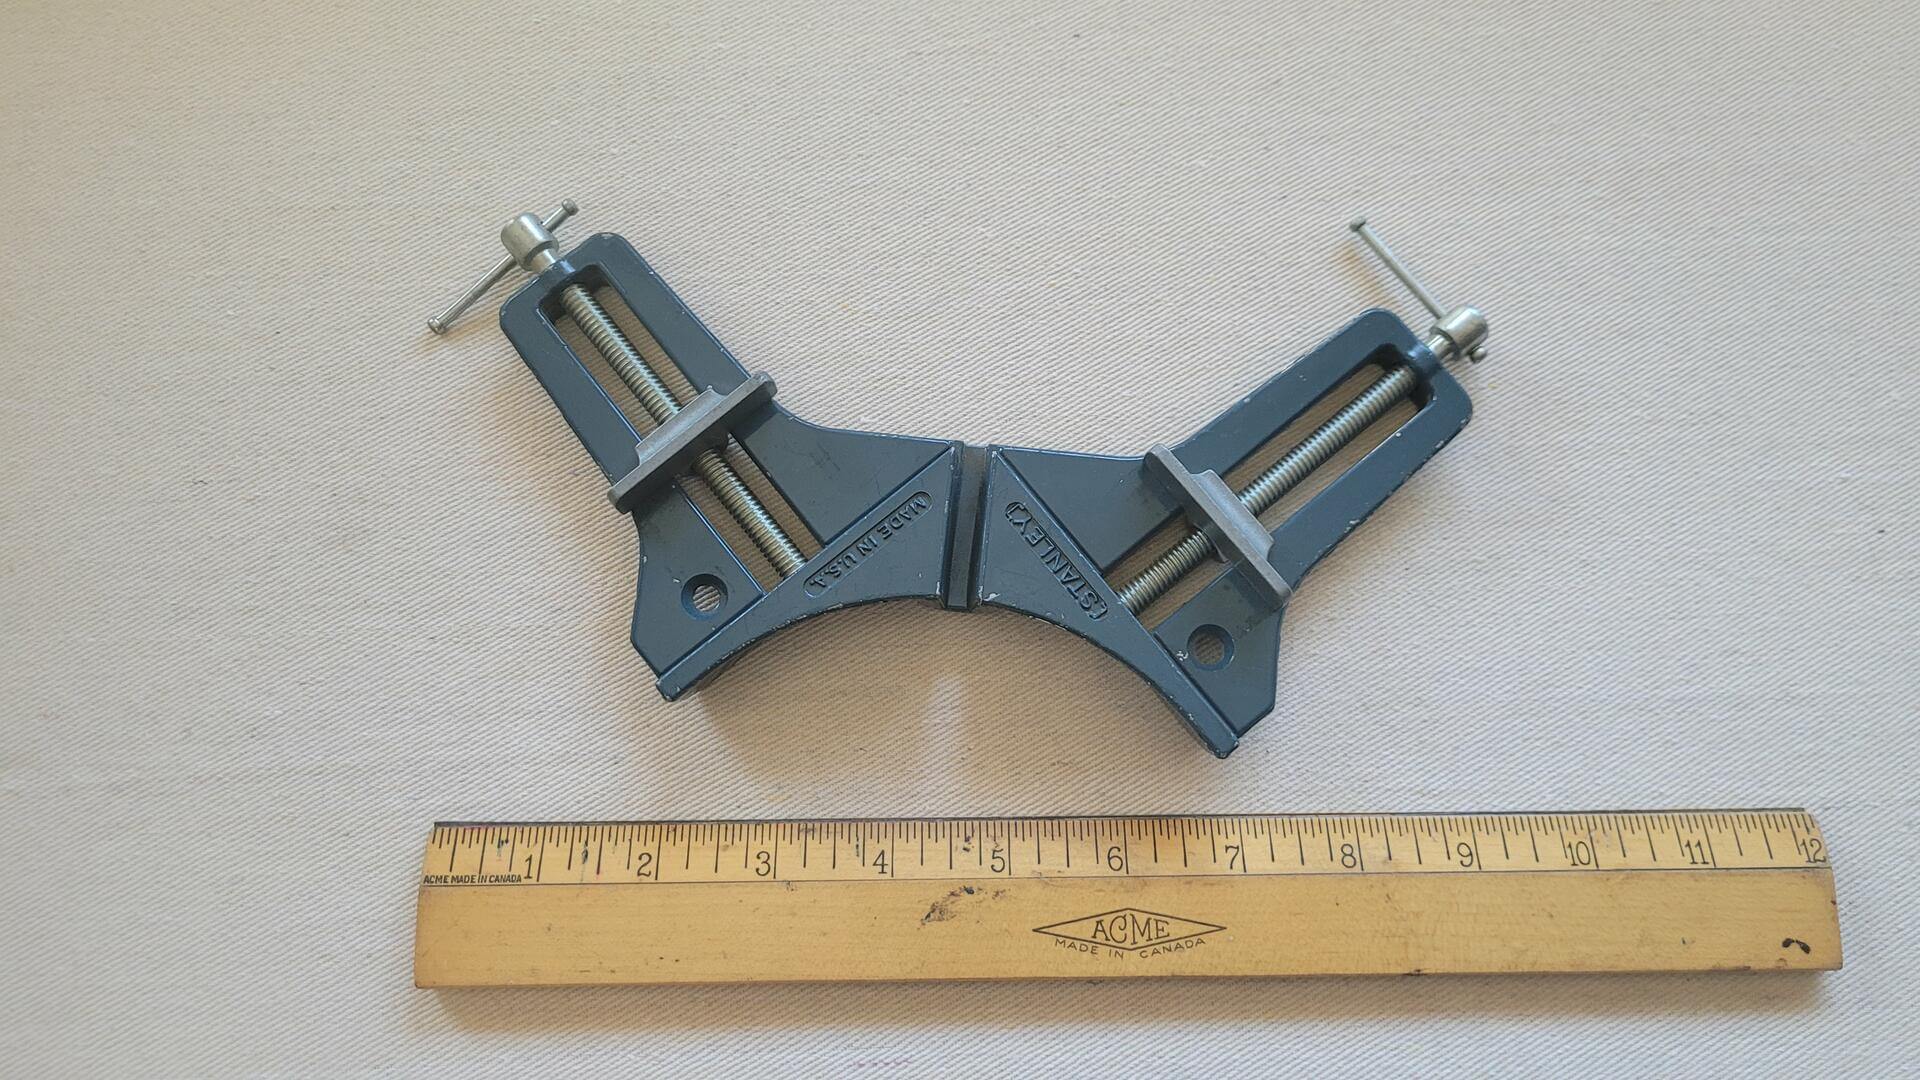 Stanley No 83-404 corner mitre clamps cast aluminum picture framing tool. Vintage made in USA woodworking carpentry vises and clamps